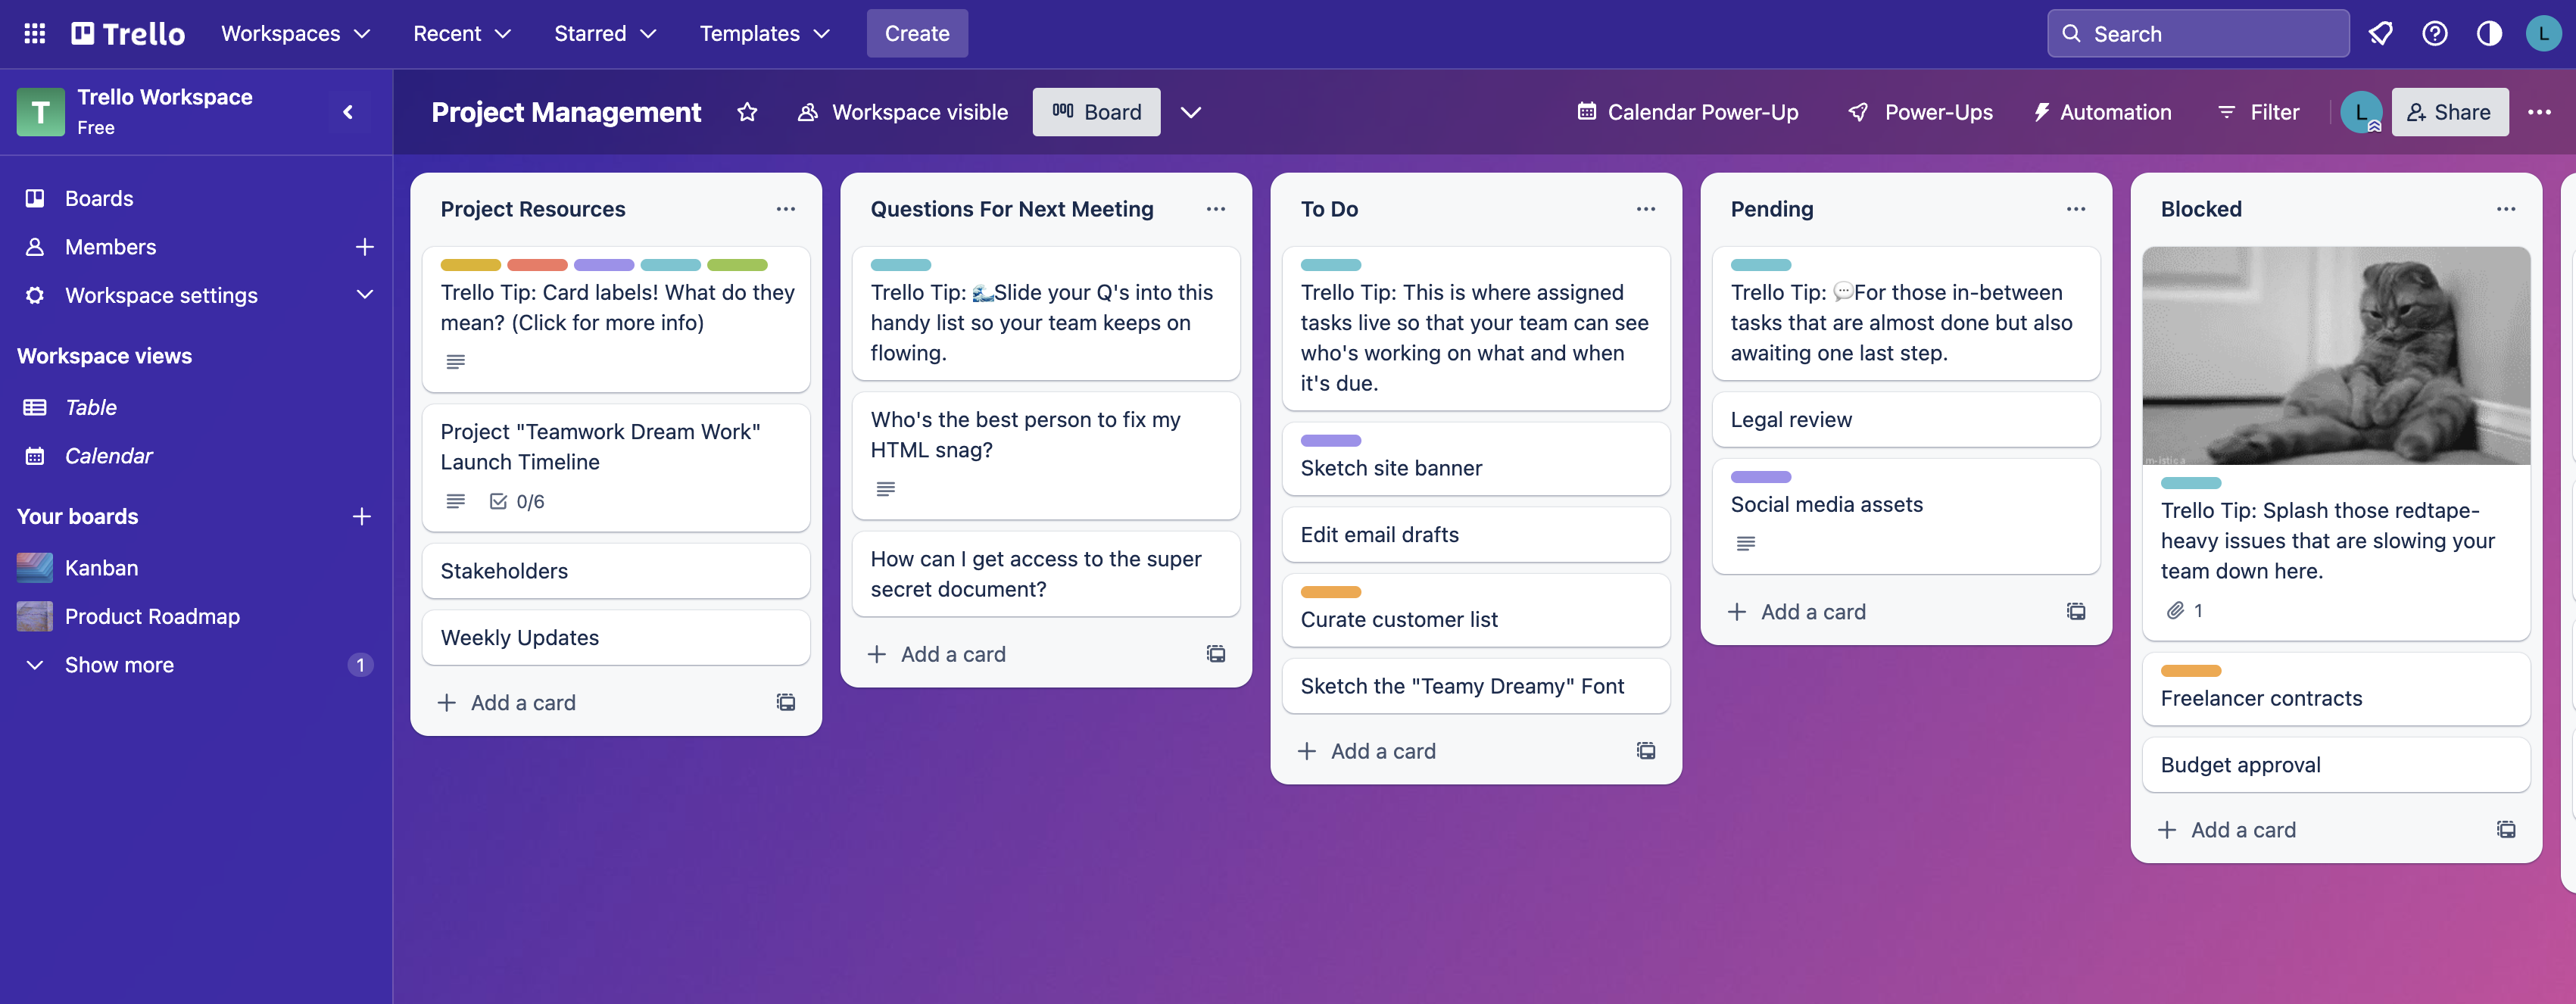 How to Use Trello for Project Management, Trello Tutorials for Beginner to  Advanced, Imran Emu